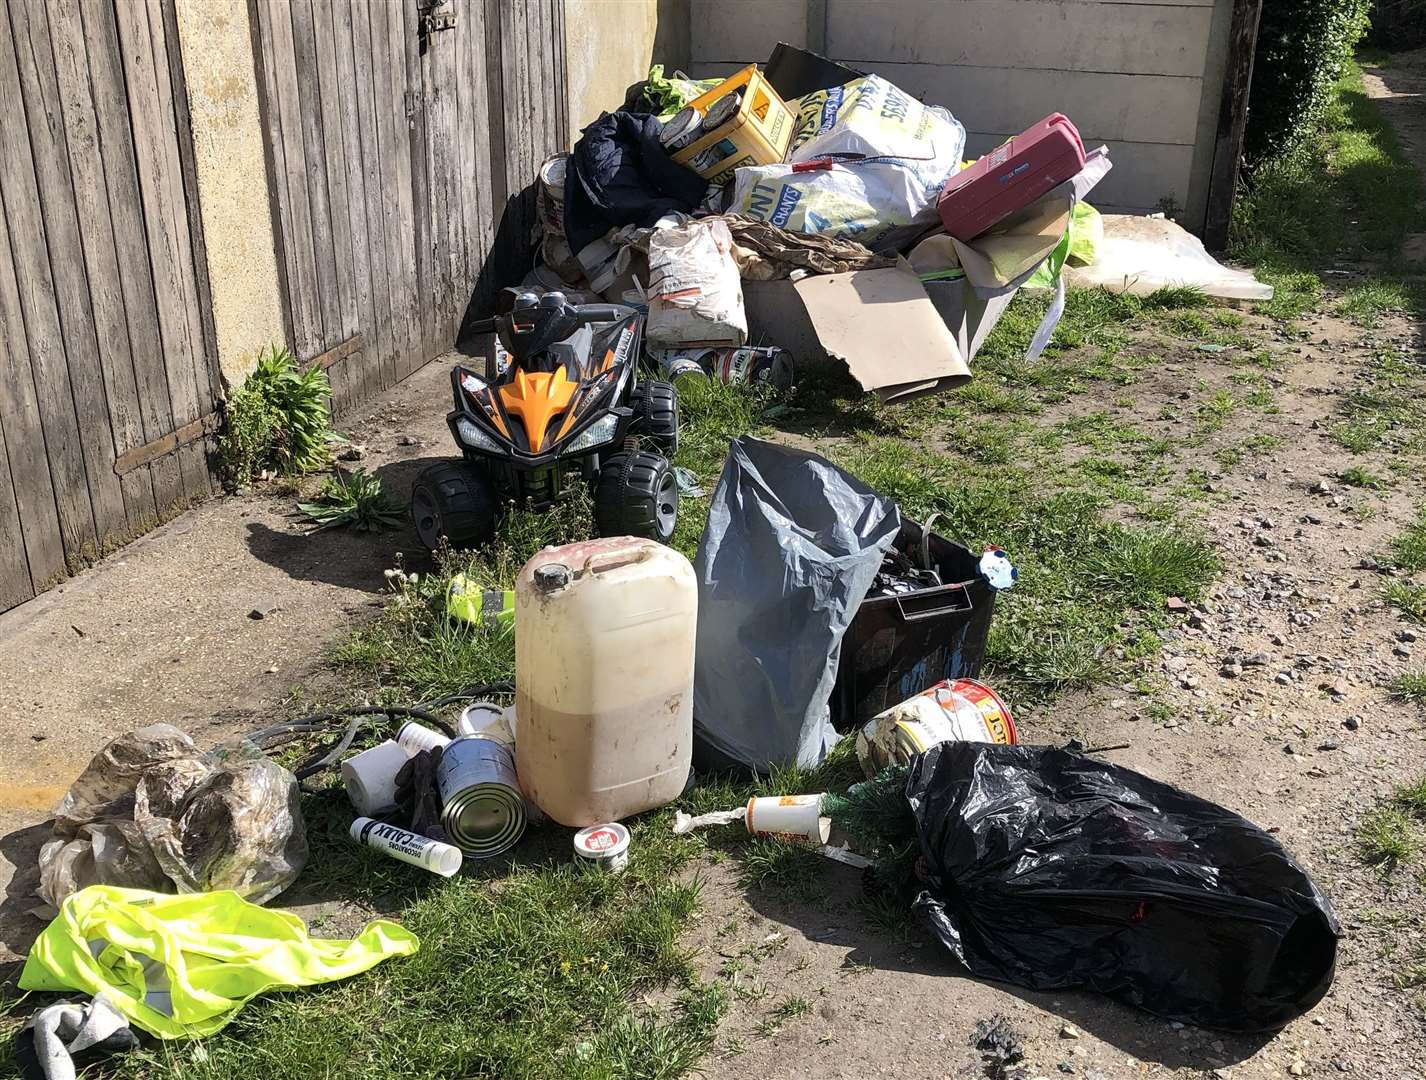 In May 2021 the occupant of a van belonging to Rutledge was seen to fly tip waste outside private garages in Park Avenue, Northfleet